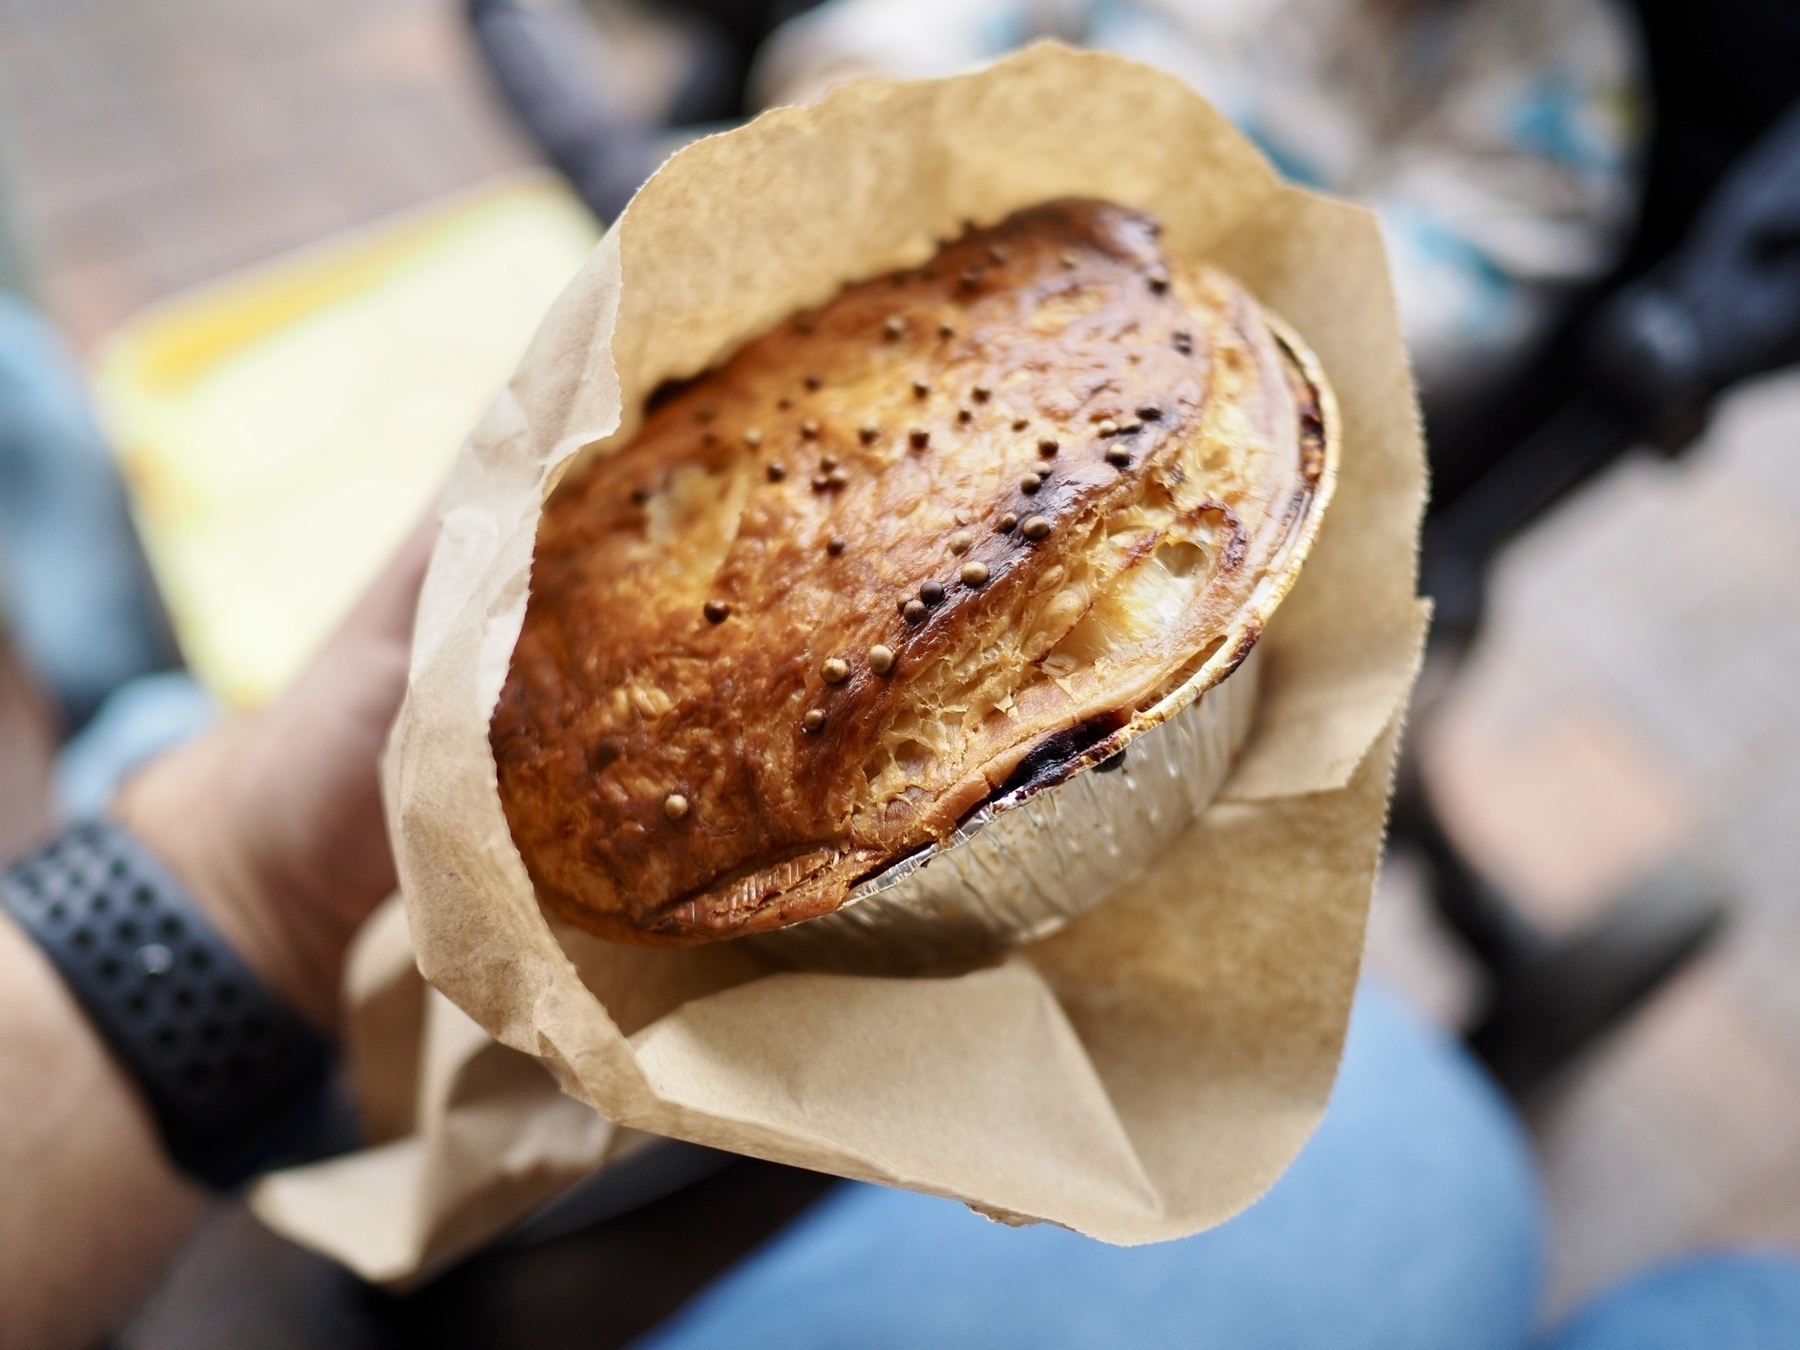 A pie with beautifully-browned pastry, served in a foil tray within a paper bag